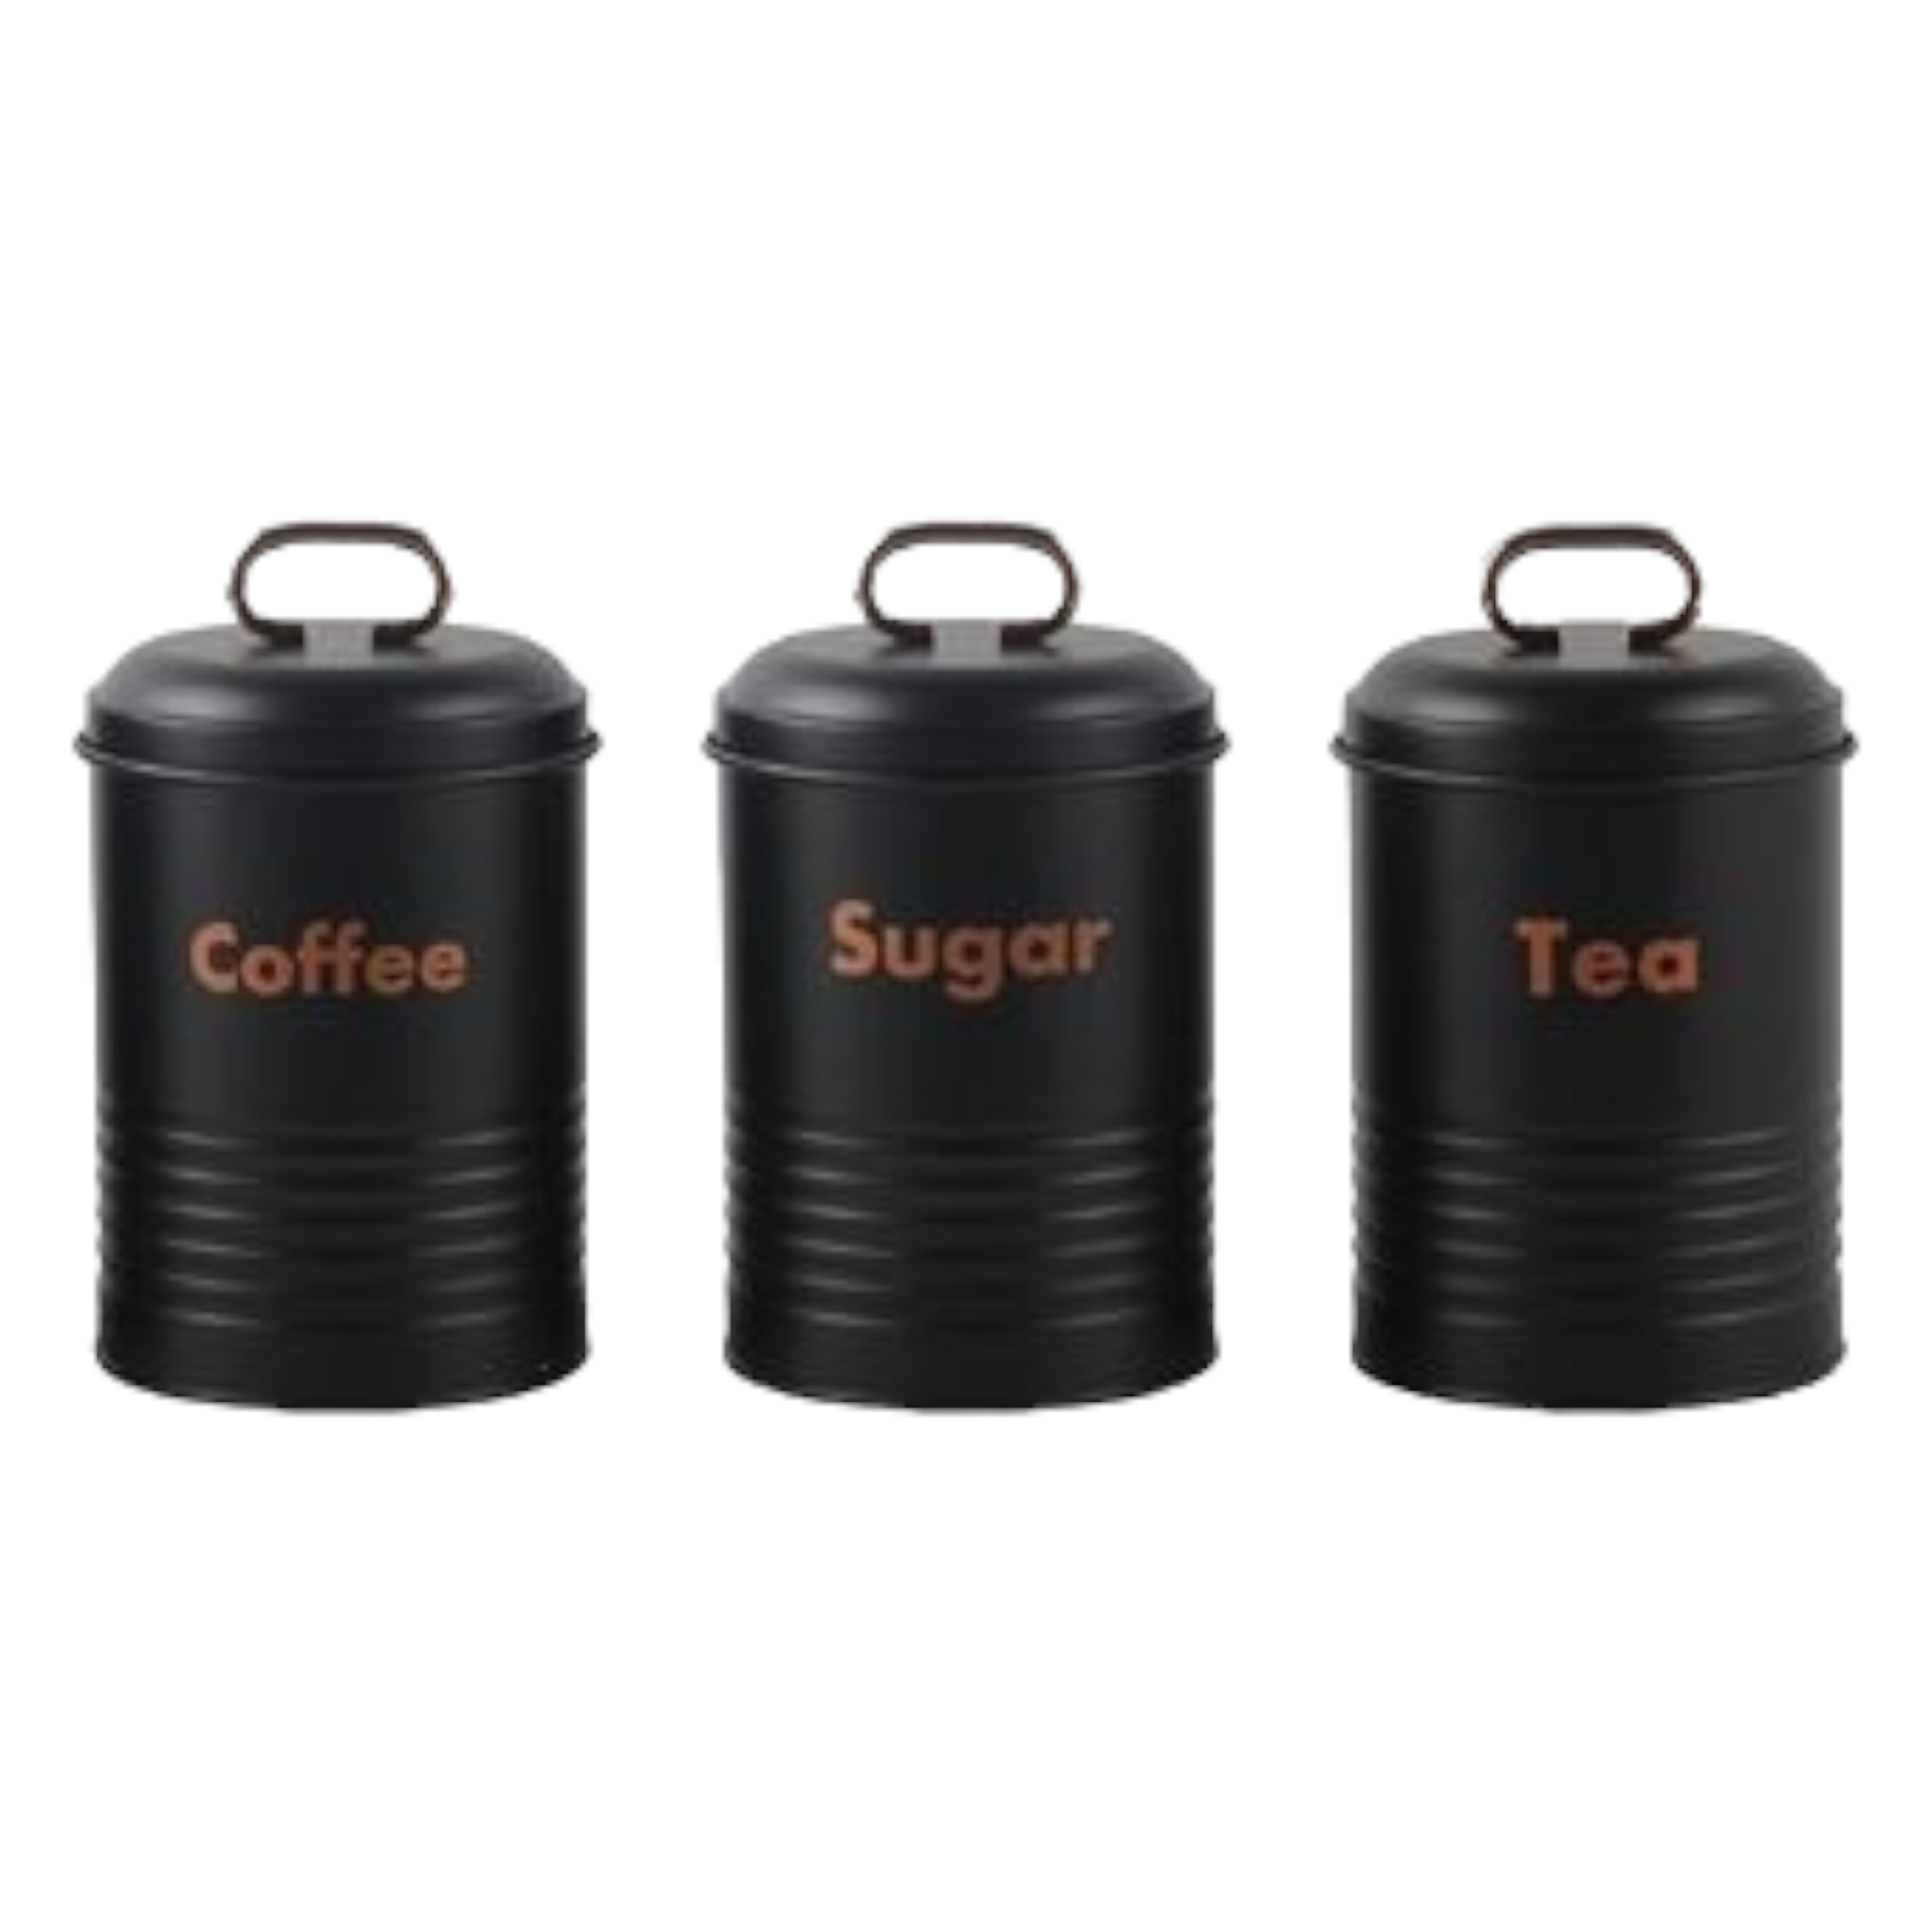 Totally Home Retro Bread Bin with Gold Handle & 3pc Canister Set Tea-Coffee-Sugar TH105